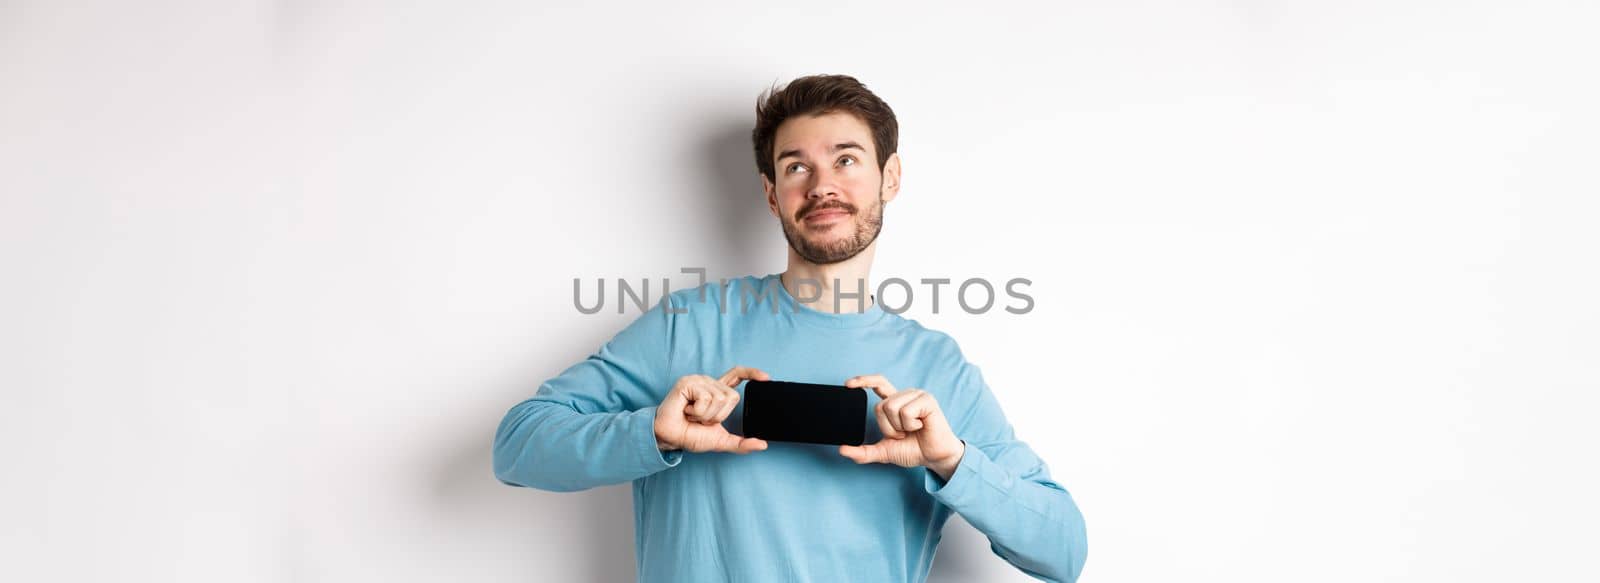 E-commerce and shopping concept. Smiling young man showing mobile screen and dreaming about something, looking at upper right corner nostalgic, standing over white background.